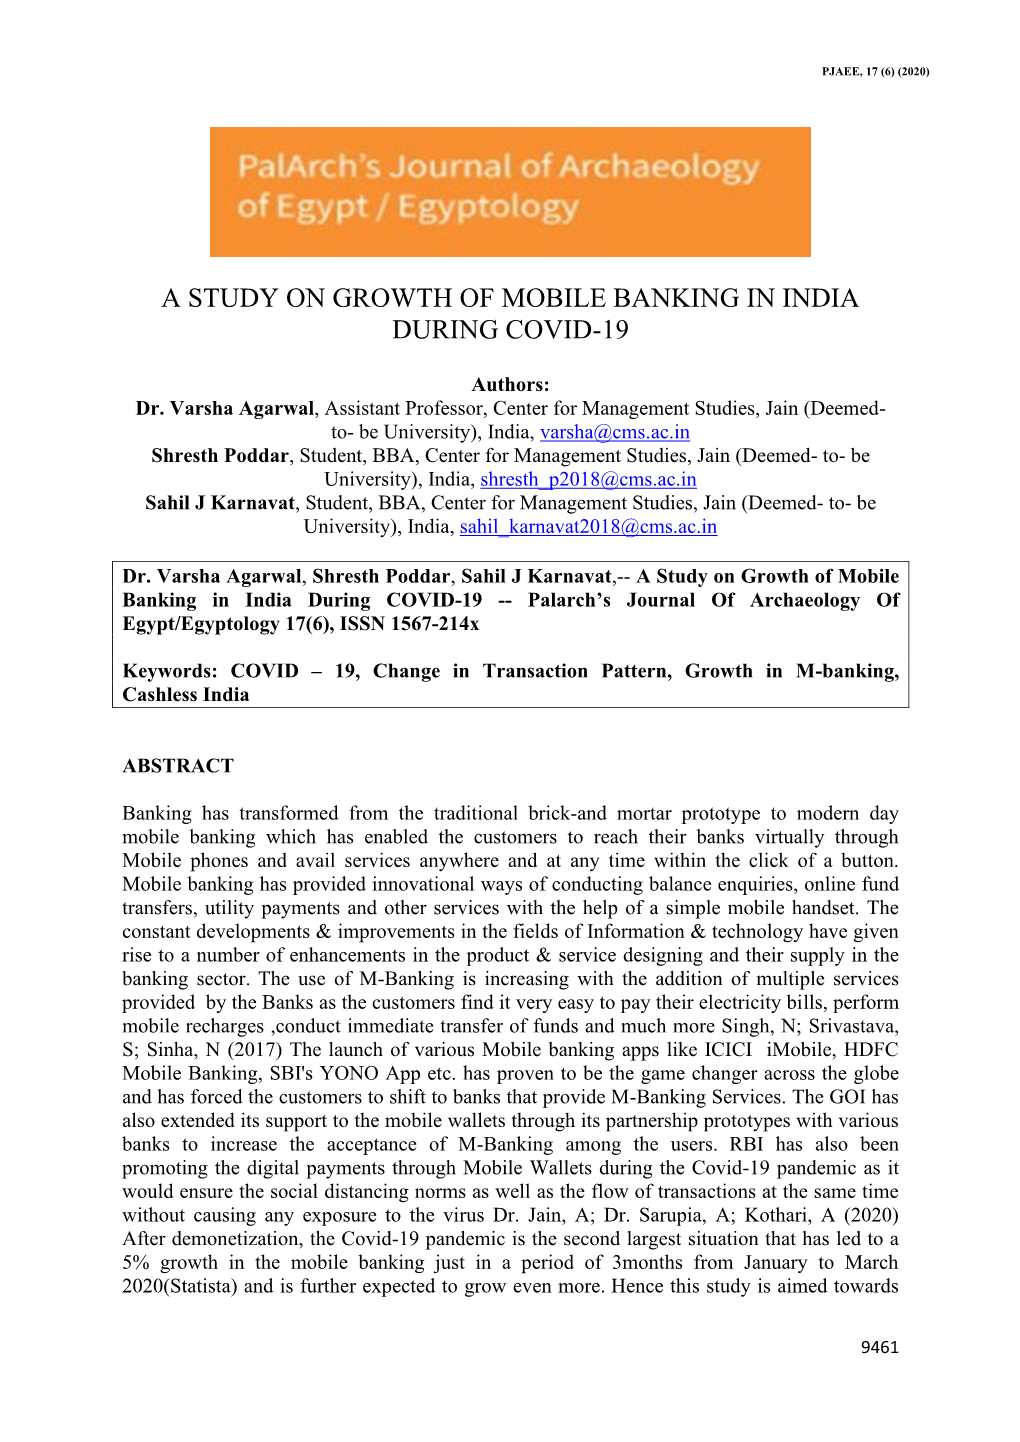 A Study on Growth of Mobile Banking in India During Covid-19